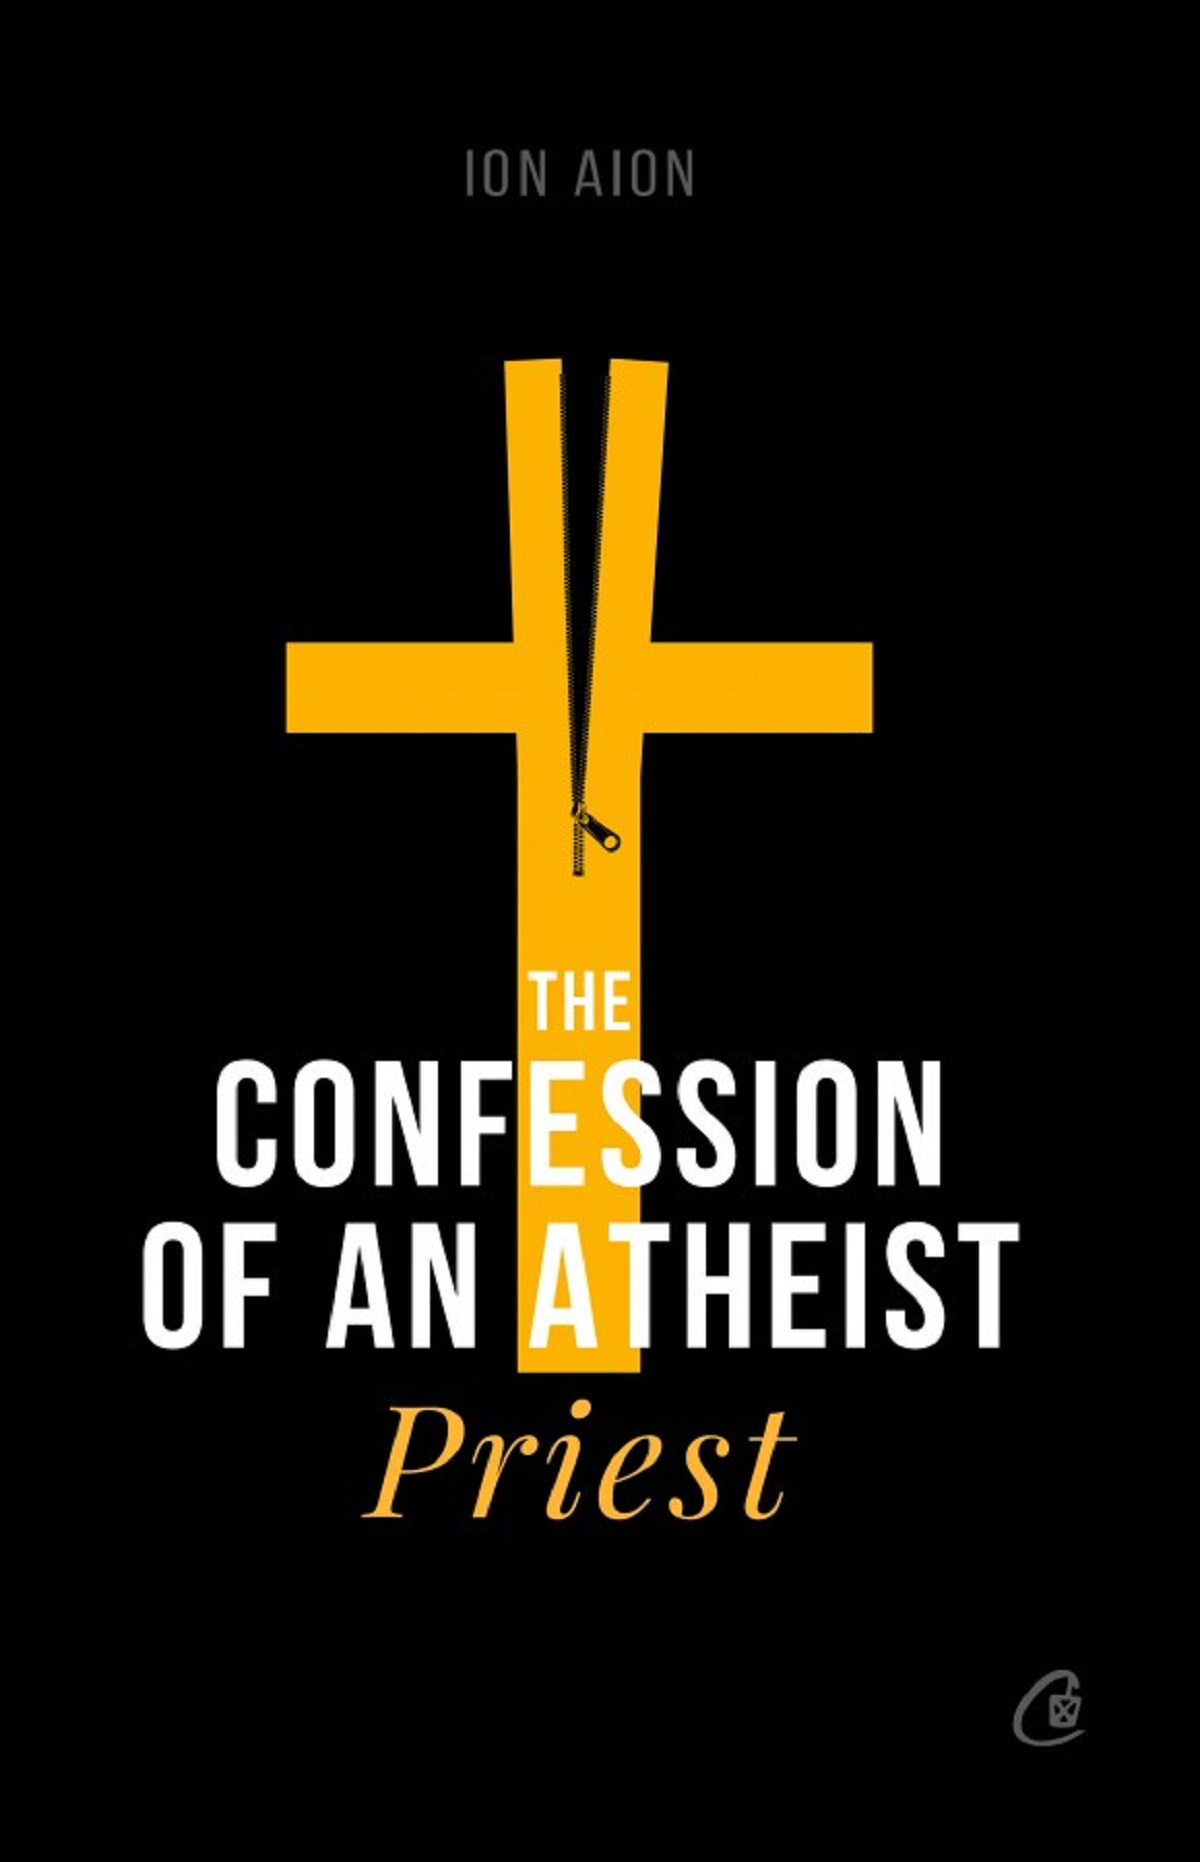 The Confession of an Atheist Priest - Ion Aion